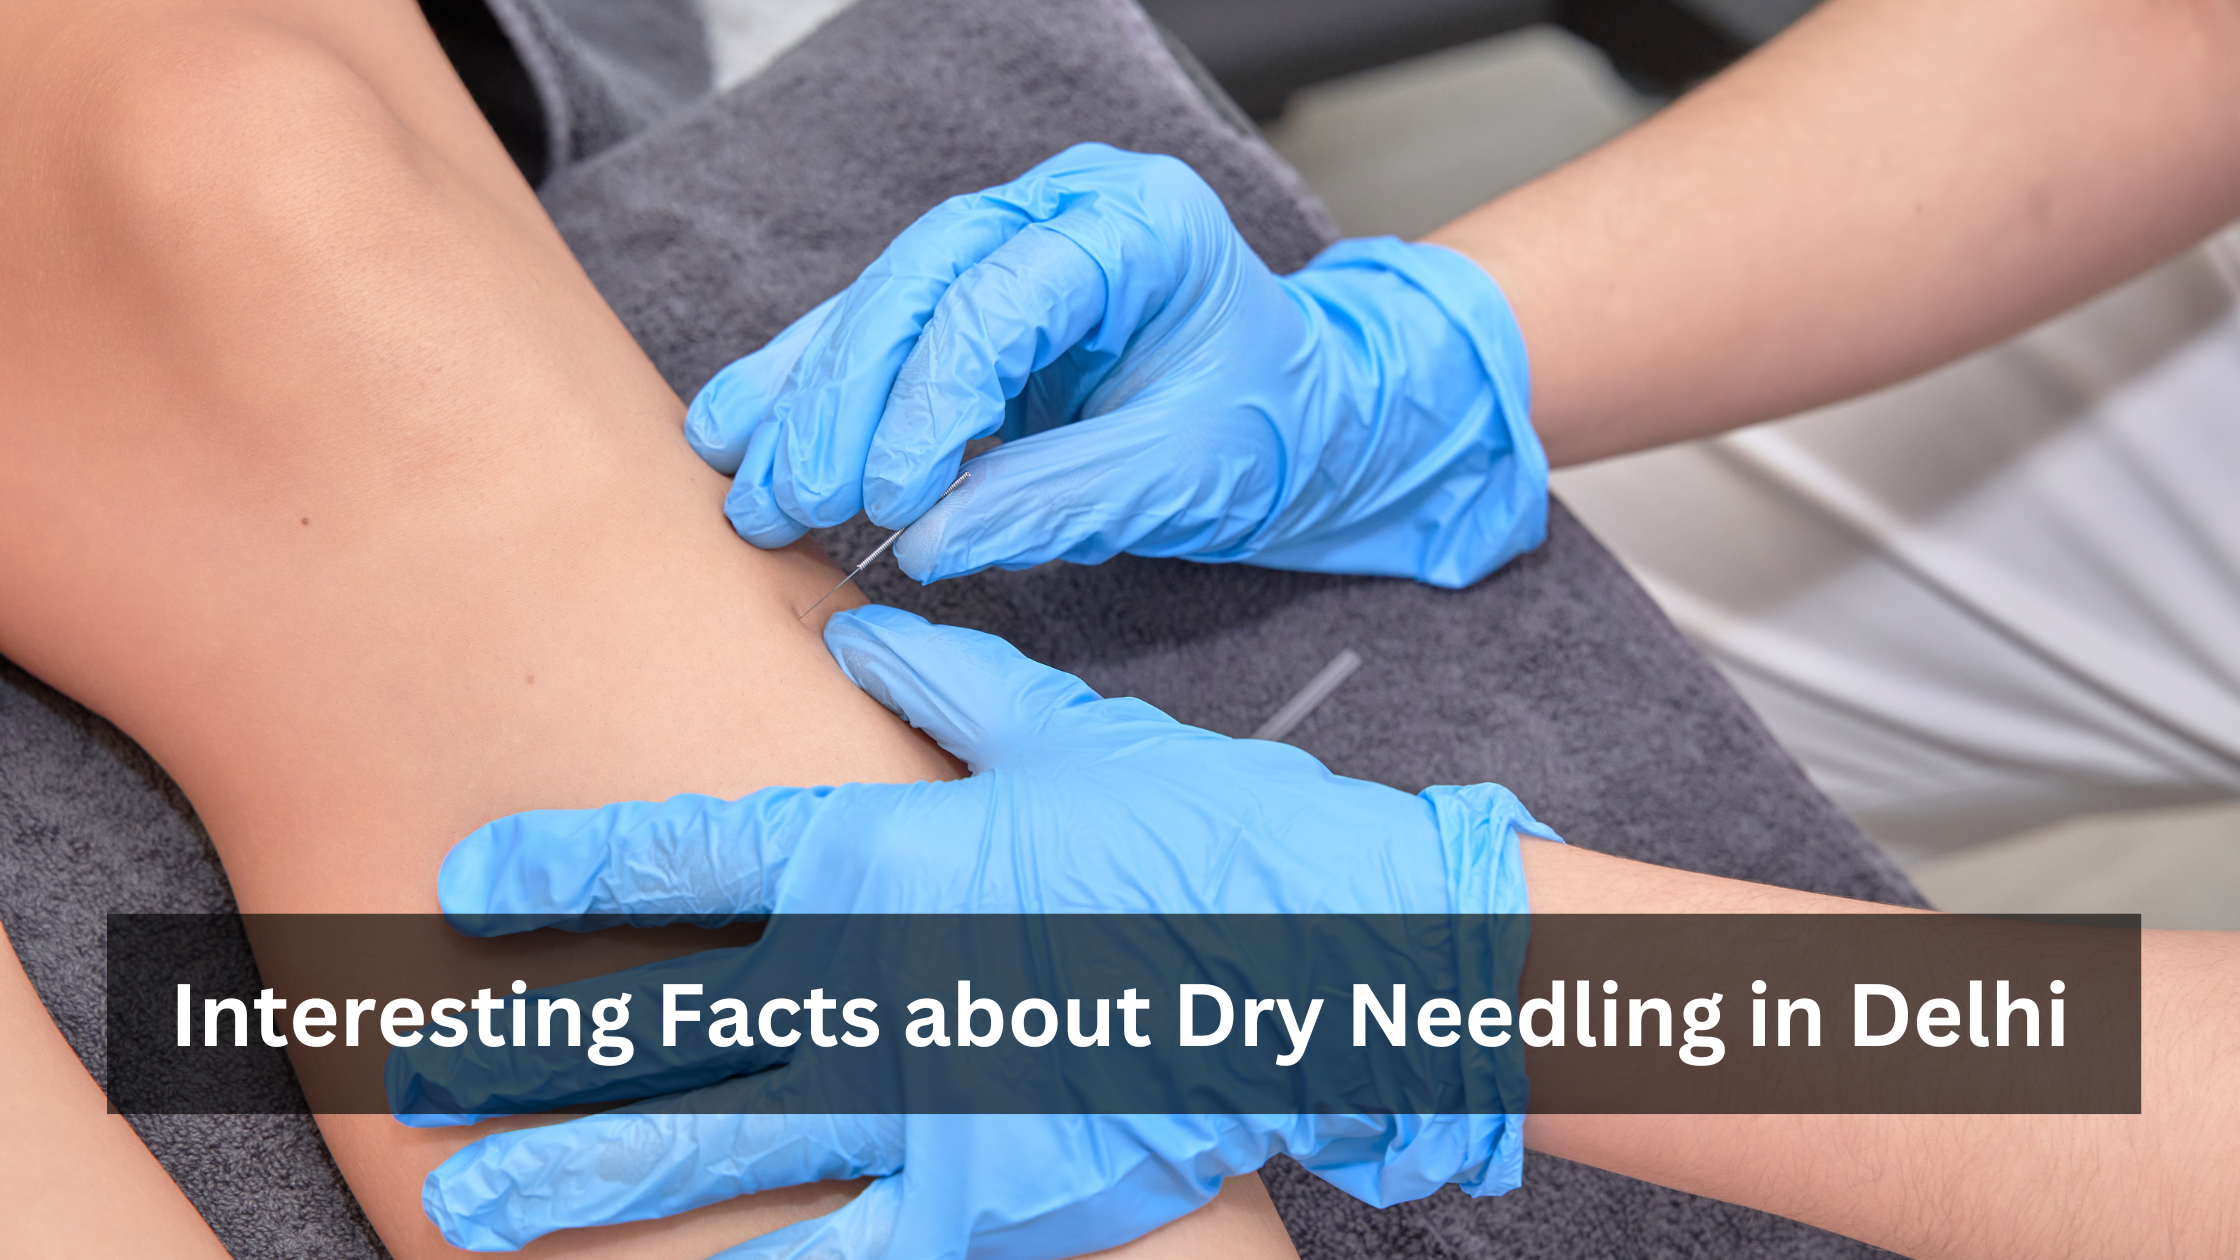 Interesting Facts about Dry Needling in Delhi